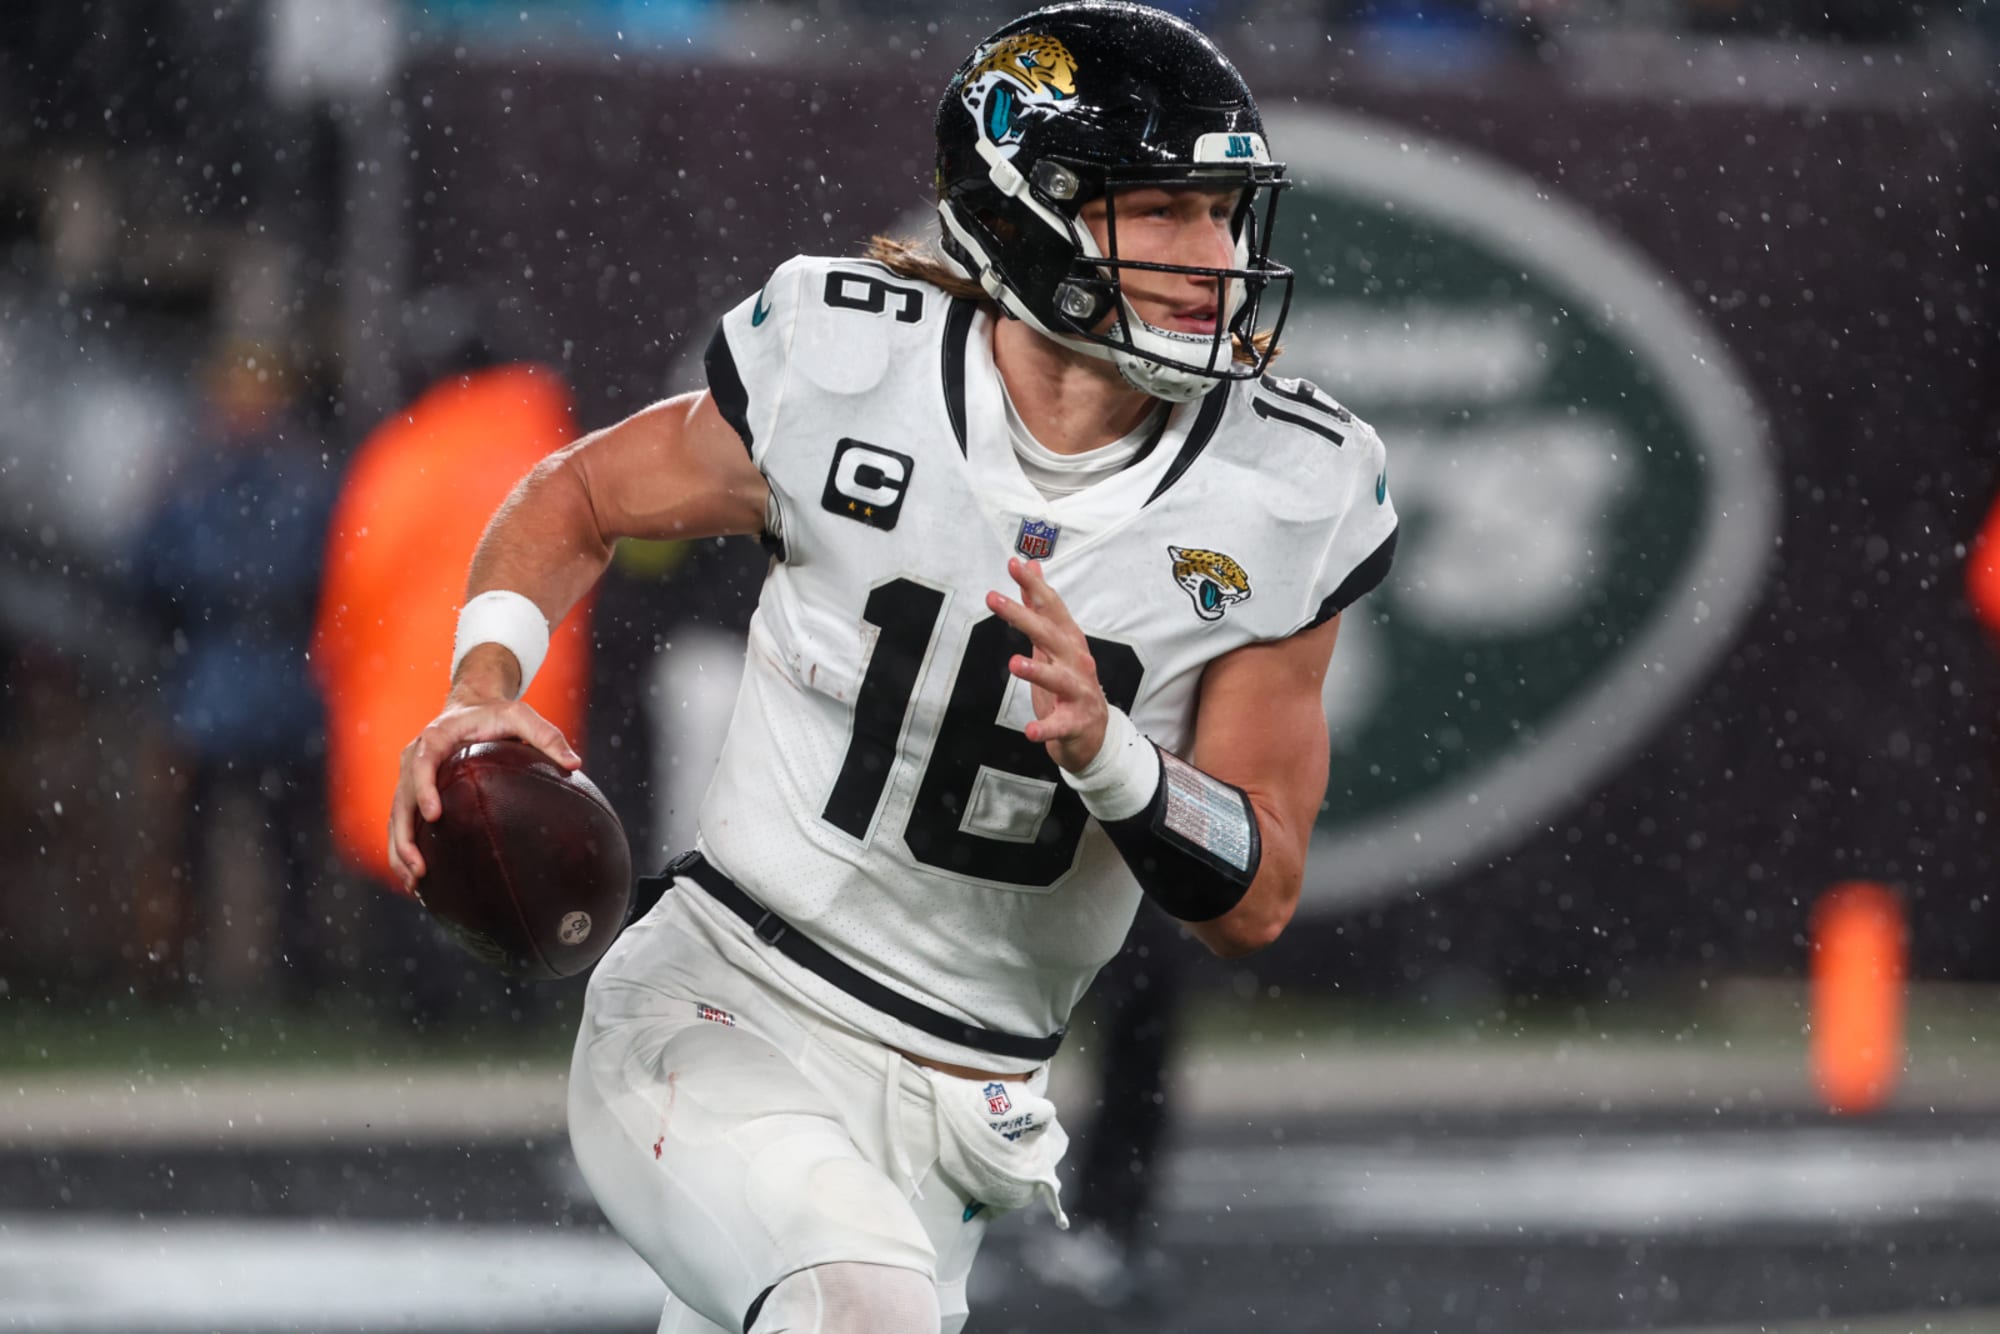 Jaguars vs Texans: Predictions and odds for Week 17 (The ultimate disappointment for Jacksonville)